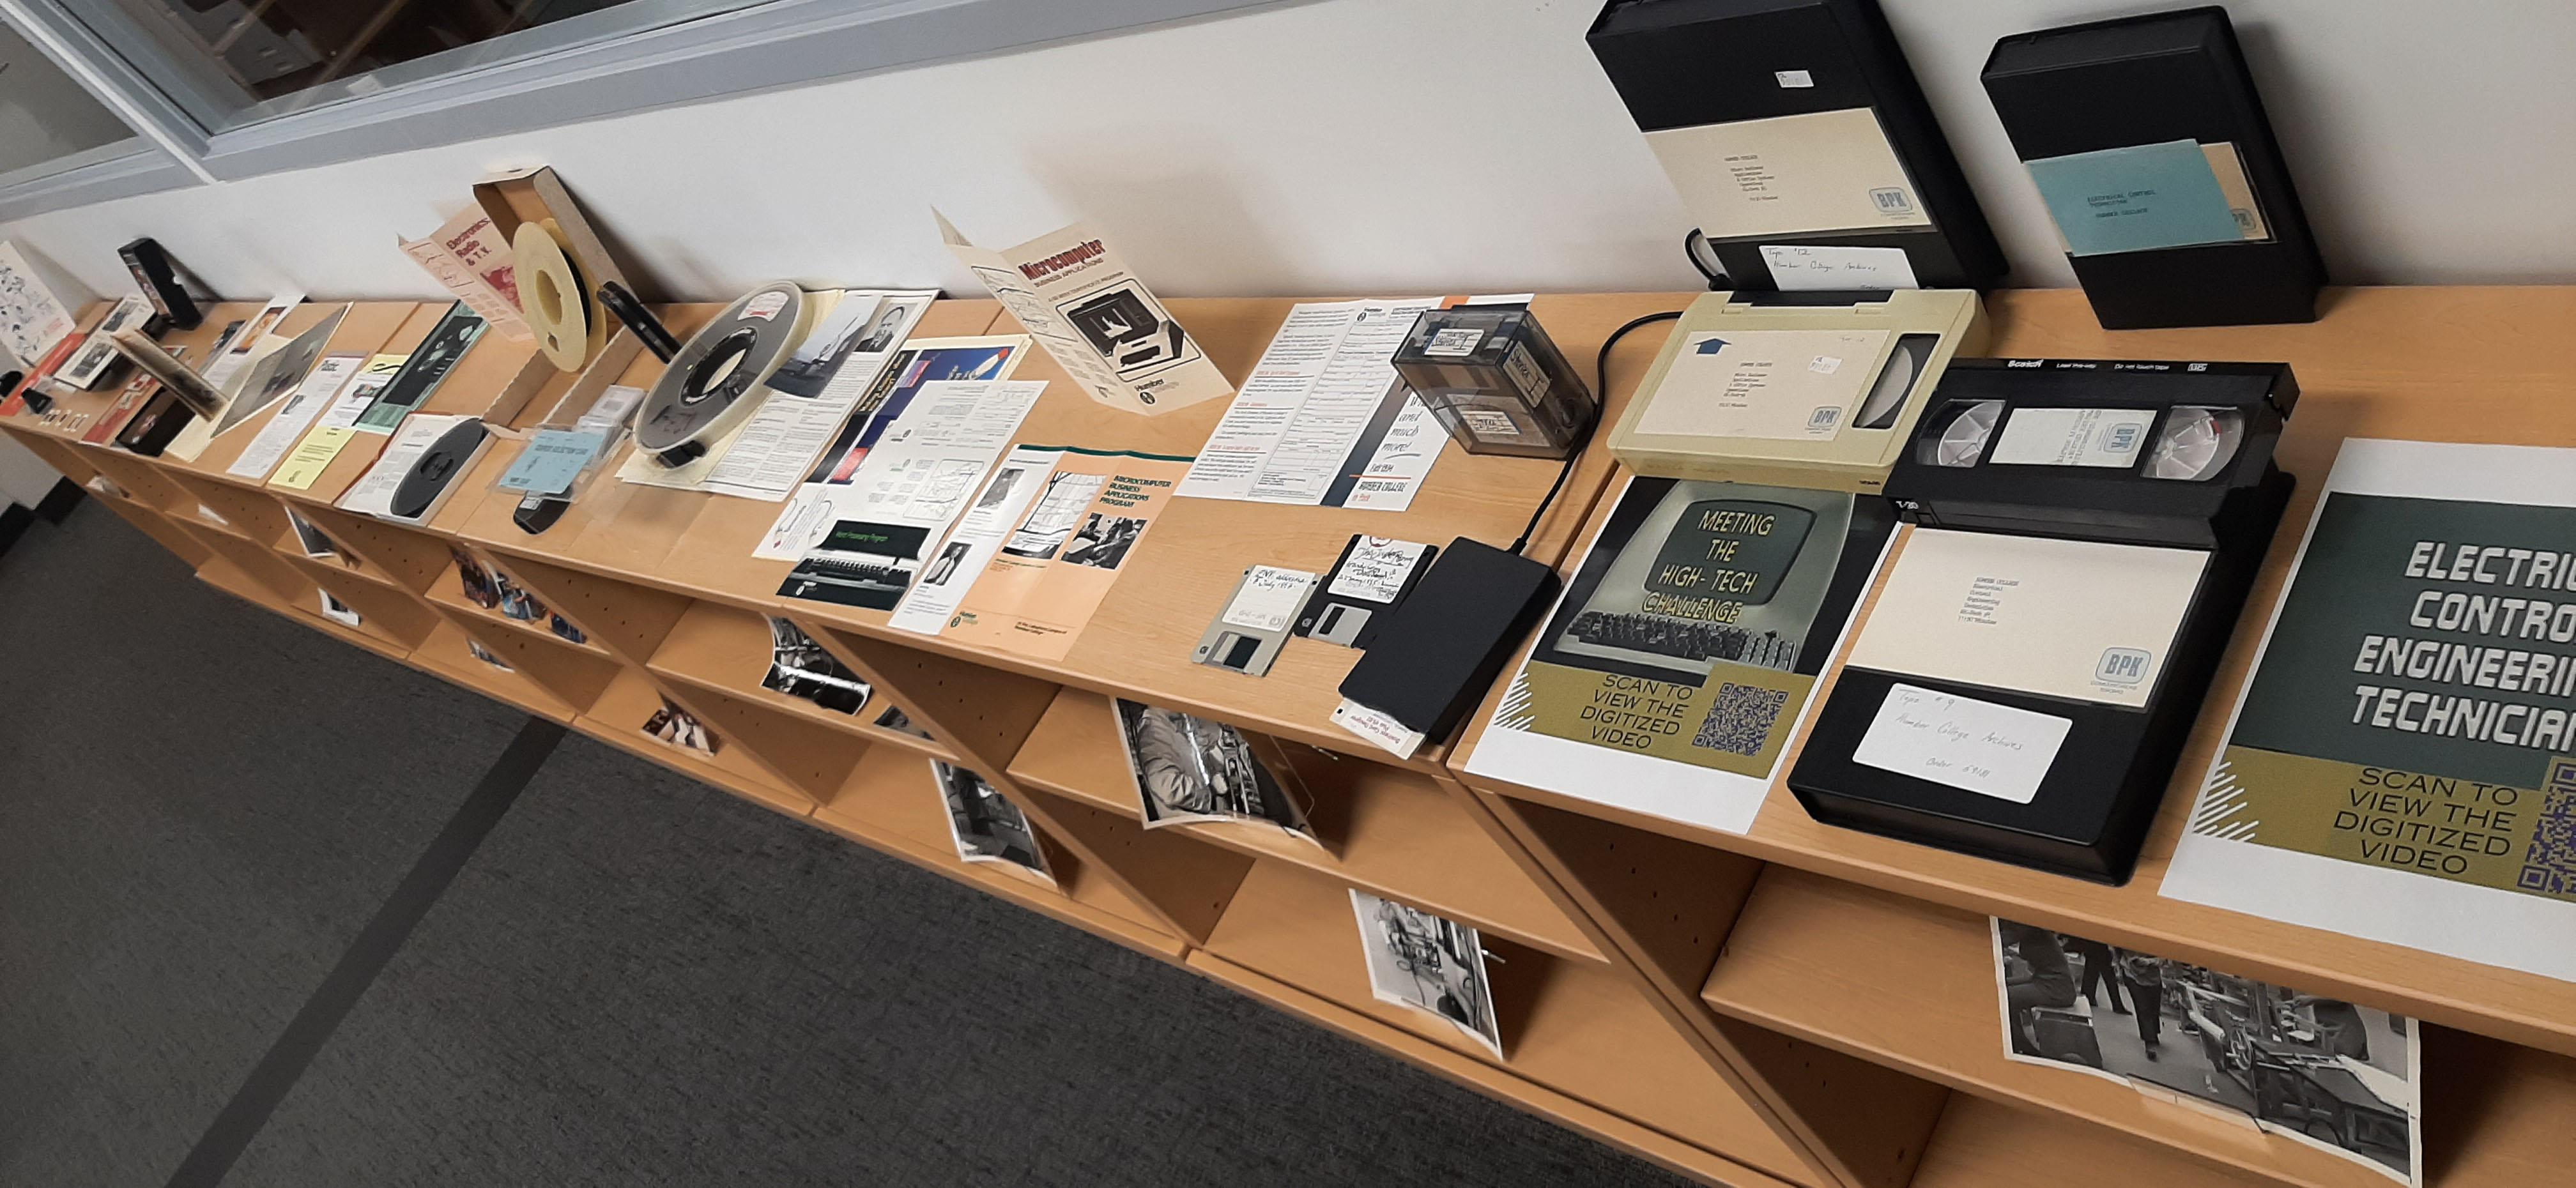 A collection of older media, including VHS tapes, and devices to play them sit on a table.